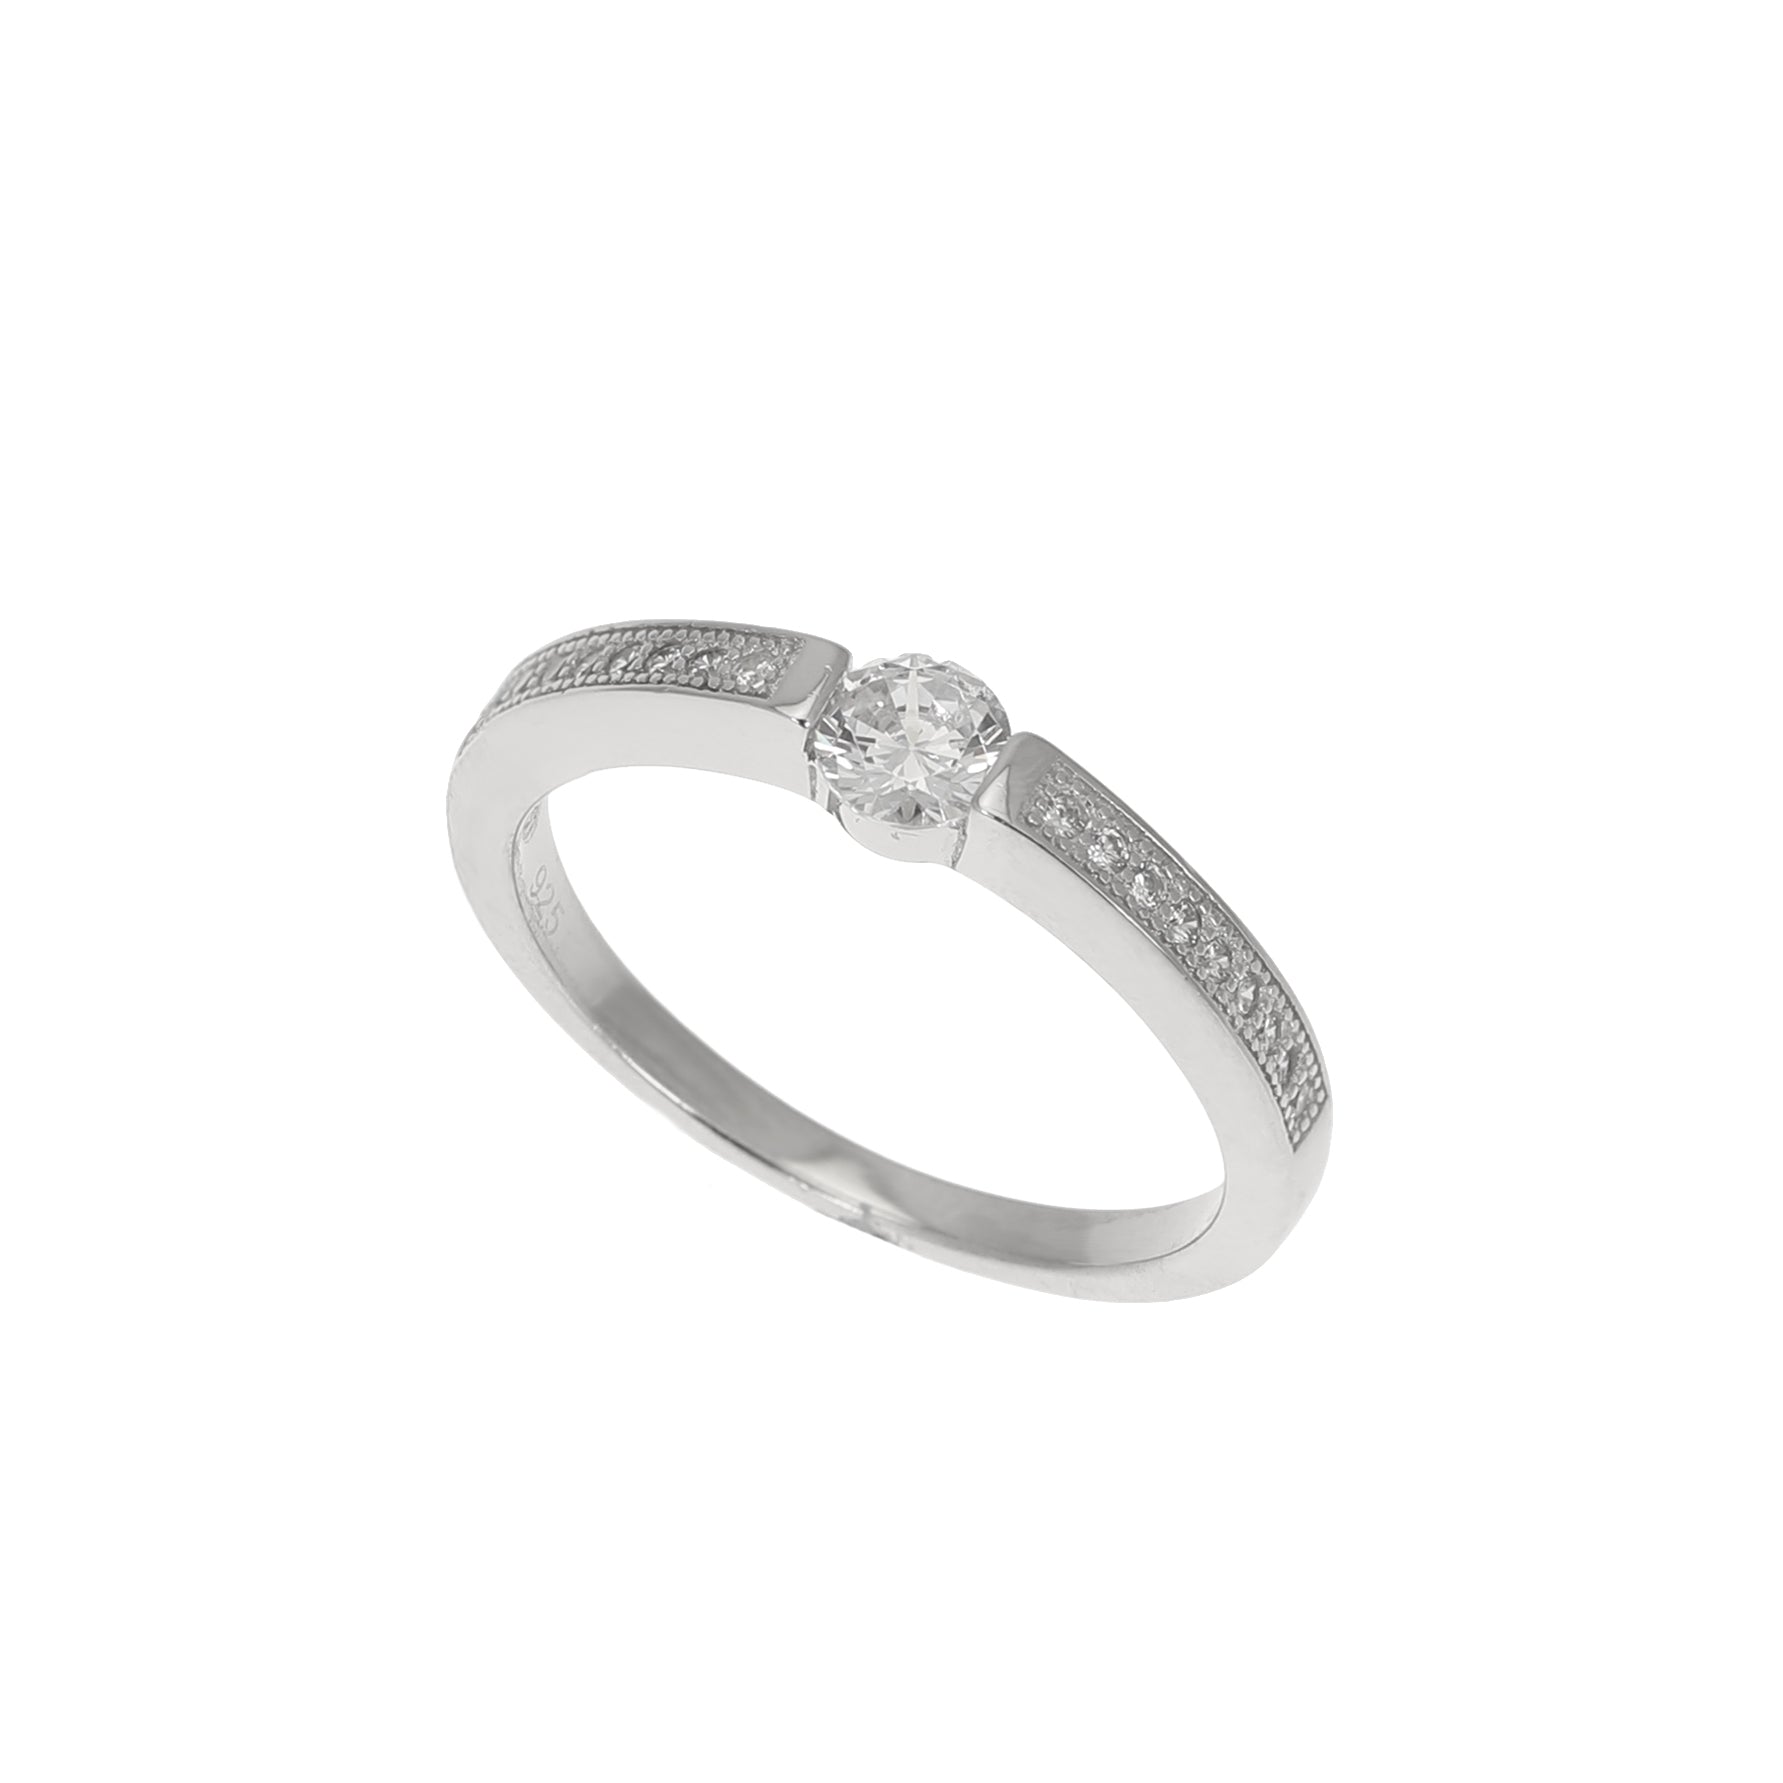 Silver CZ Tension Set Solitaire Ring